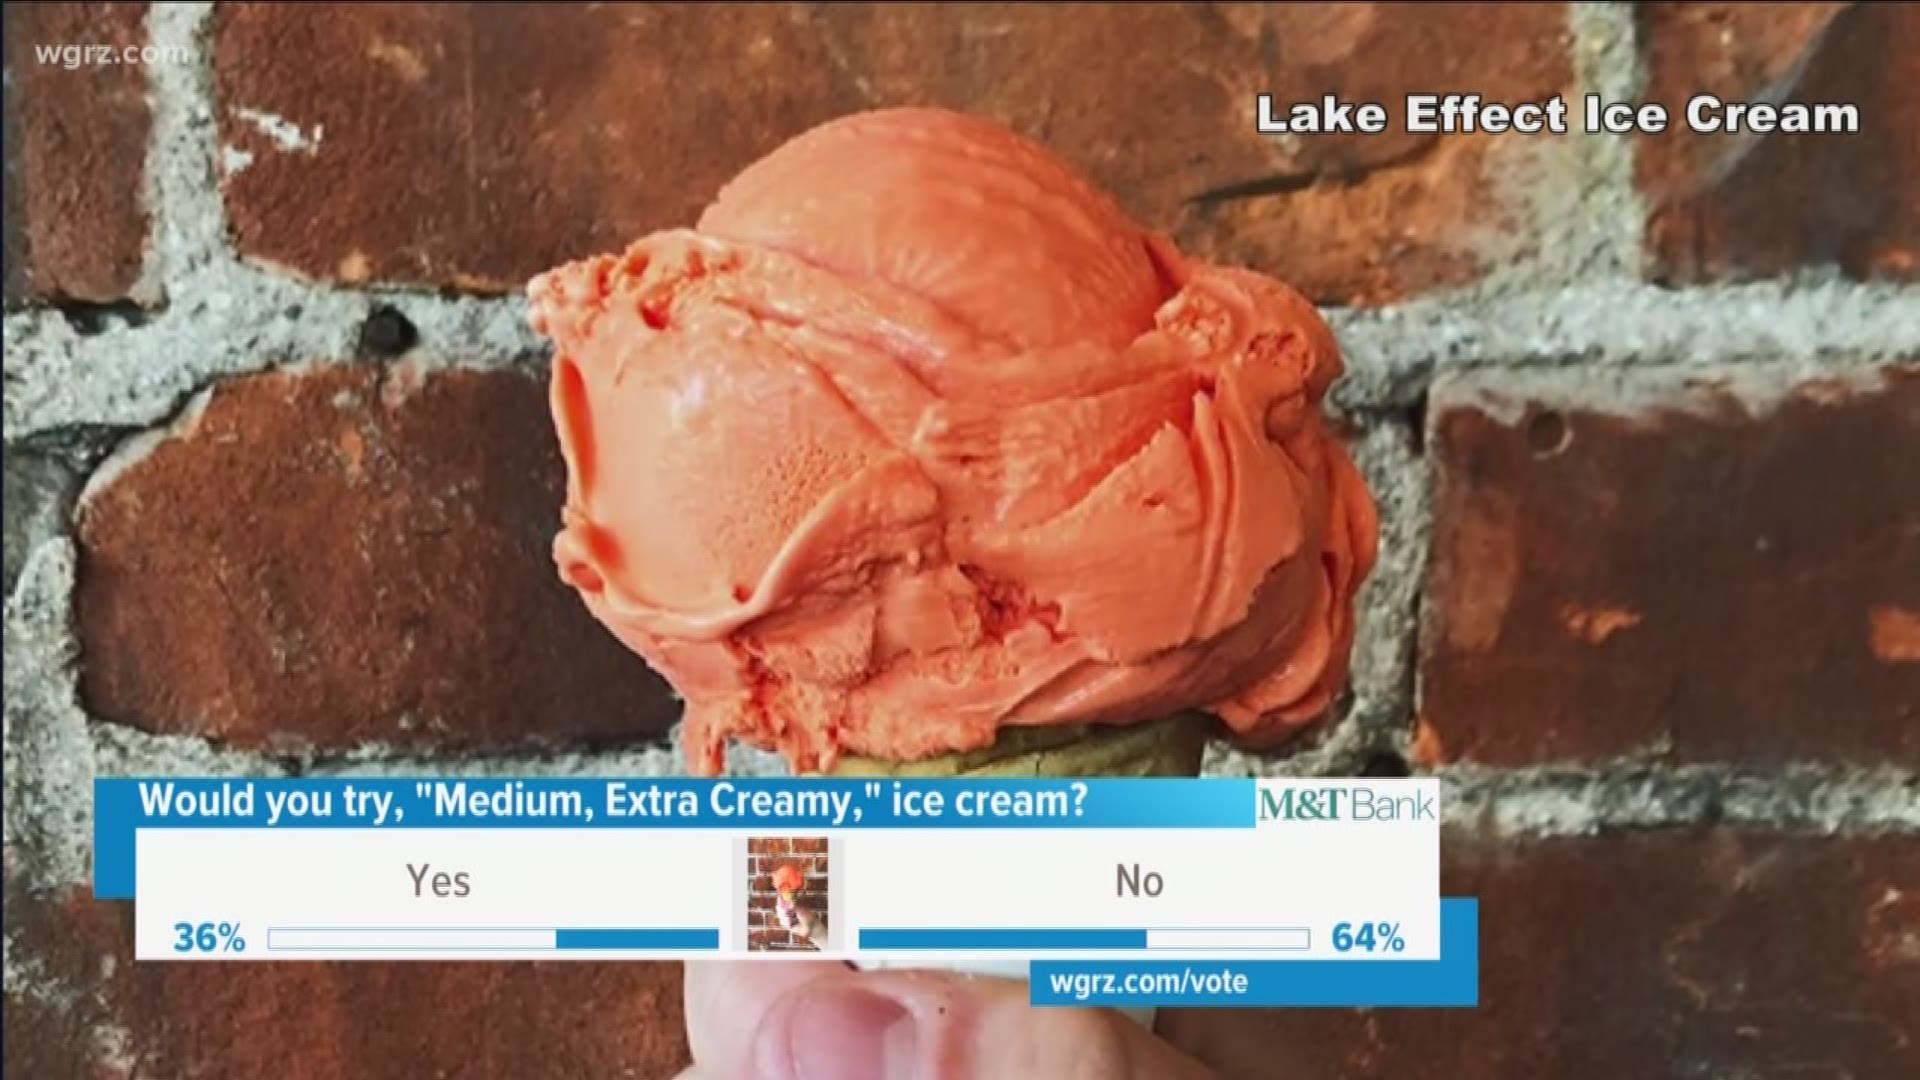 The new flavor, called "Medium, Extra Creamy," is available at its locations in both Lockport and on Hertel Avenue in North Buffalo.